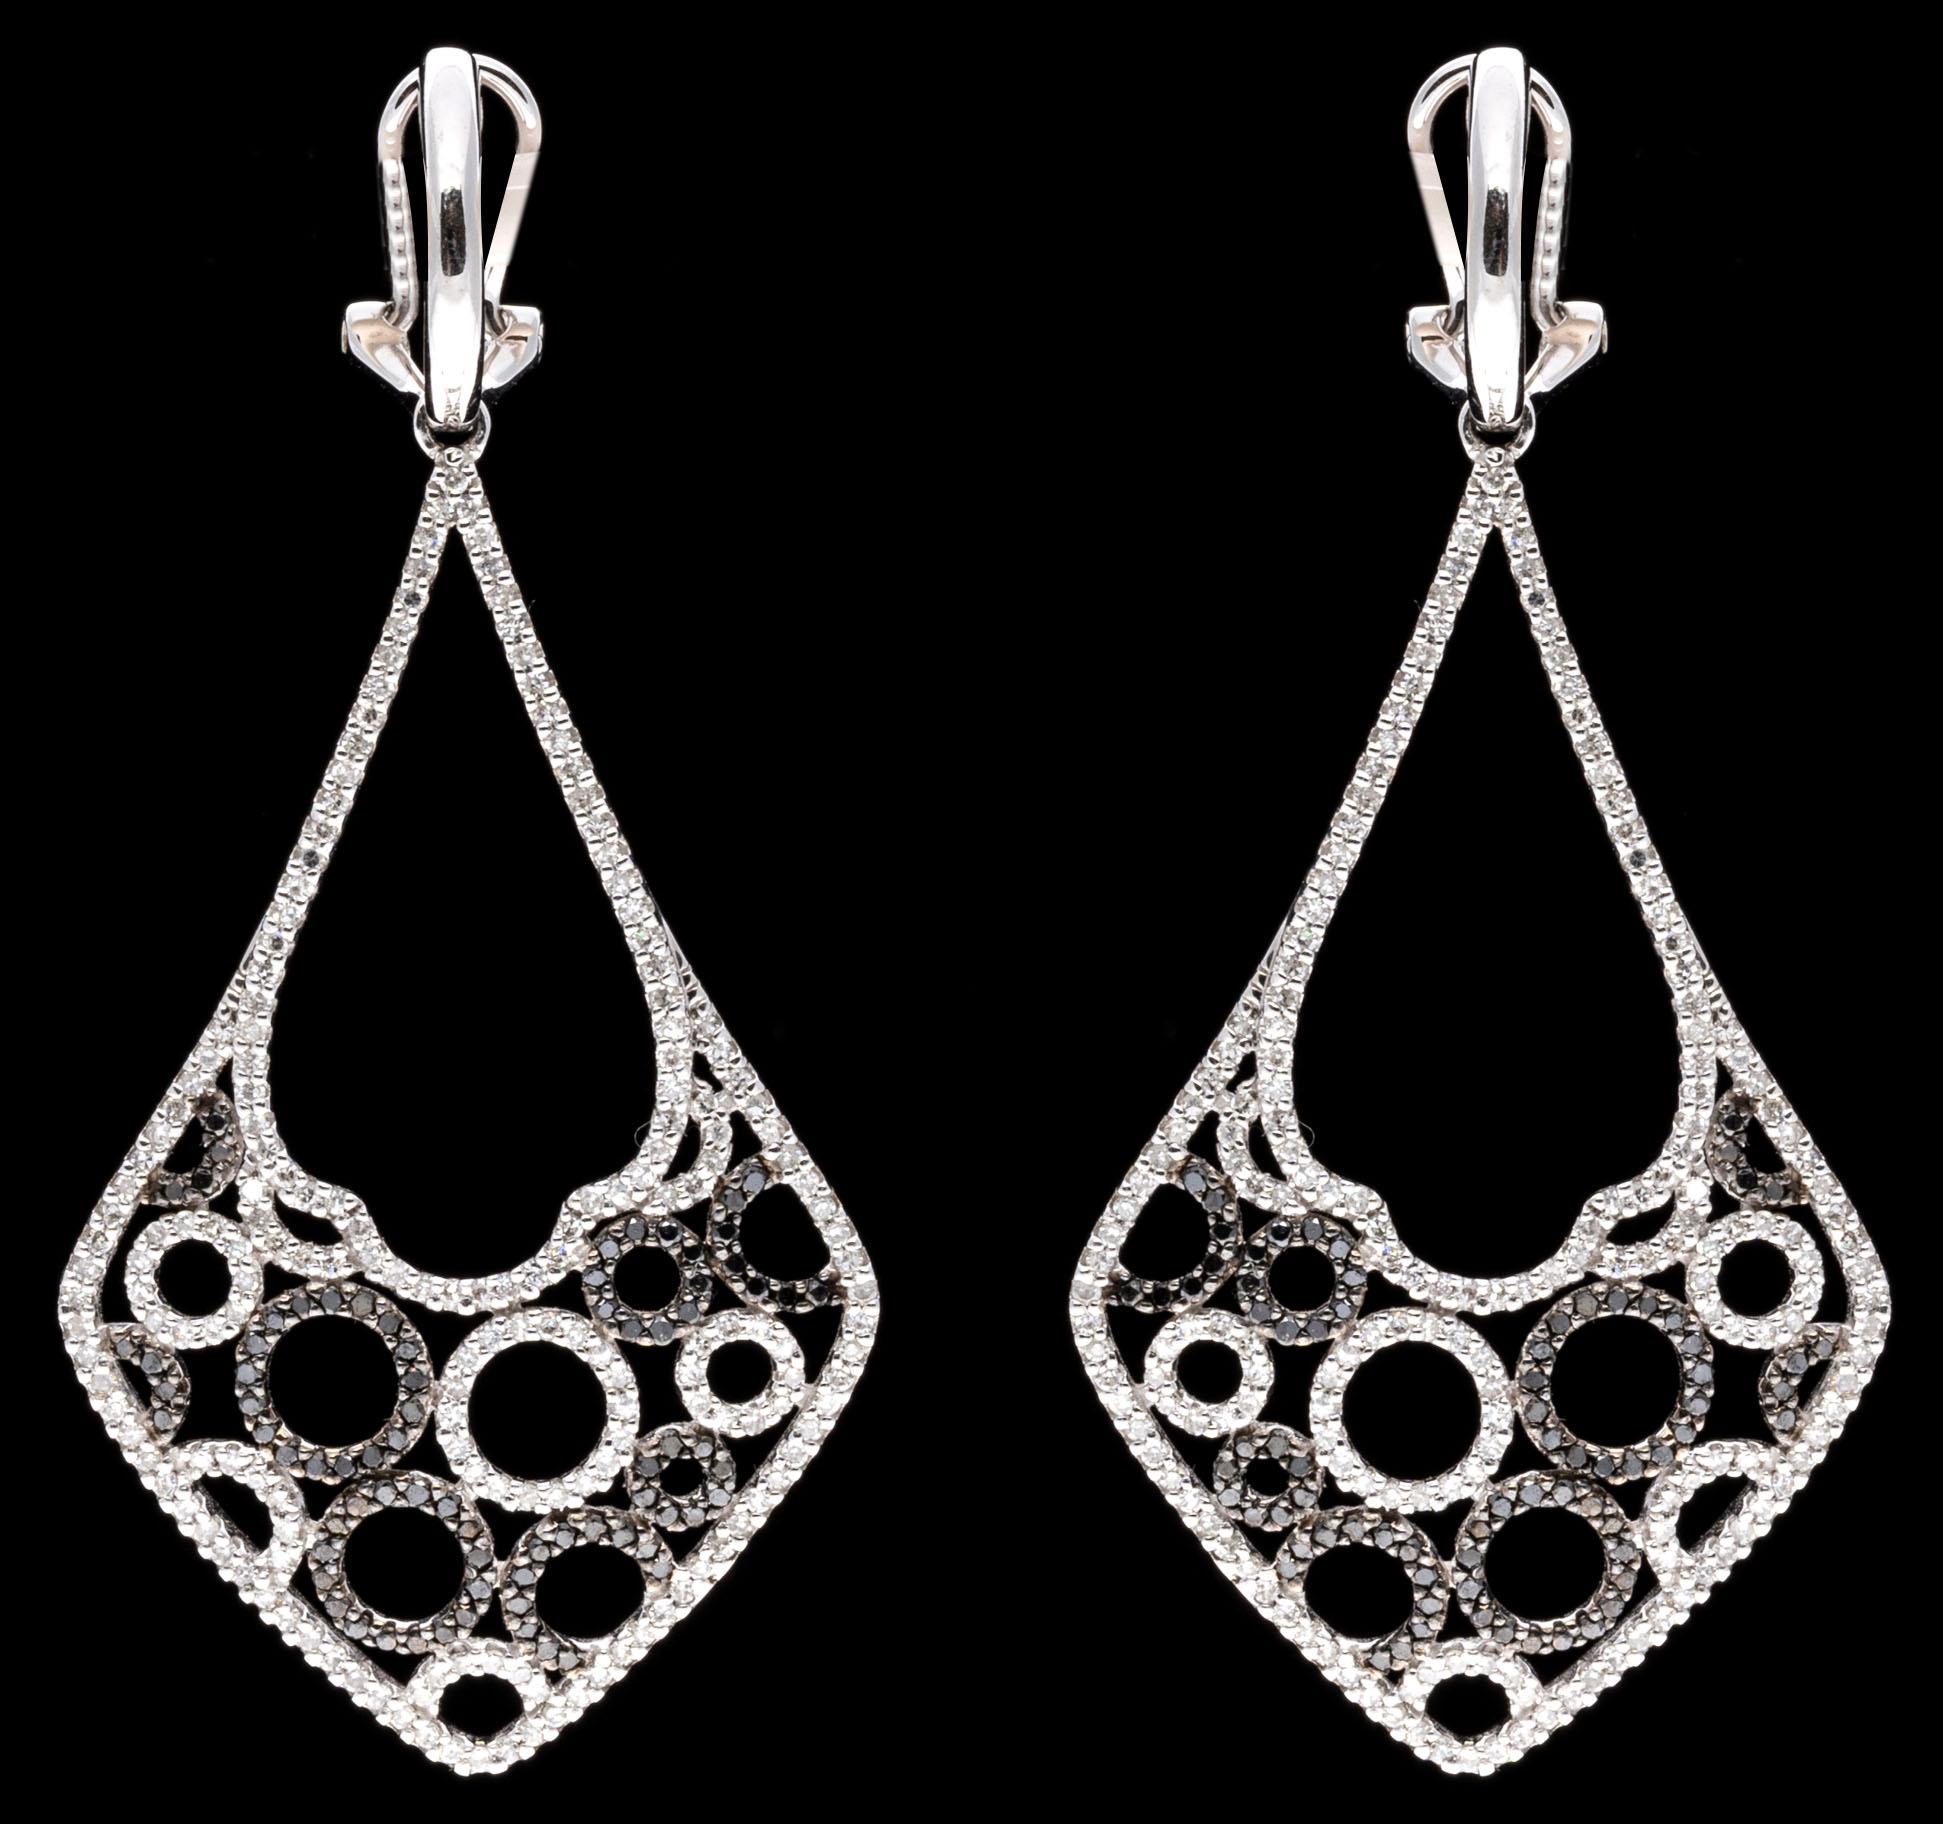 14k white gold earrings. These fabulous, contemporary earrings contain a small high polished half hoop top. Suspended from the hoop is an elongated diamond shaped, open drop style pendant, set with a trim of round faceted white diamonds that outline